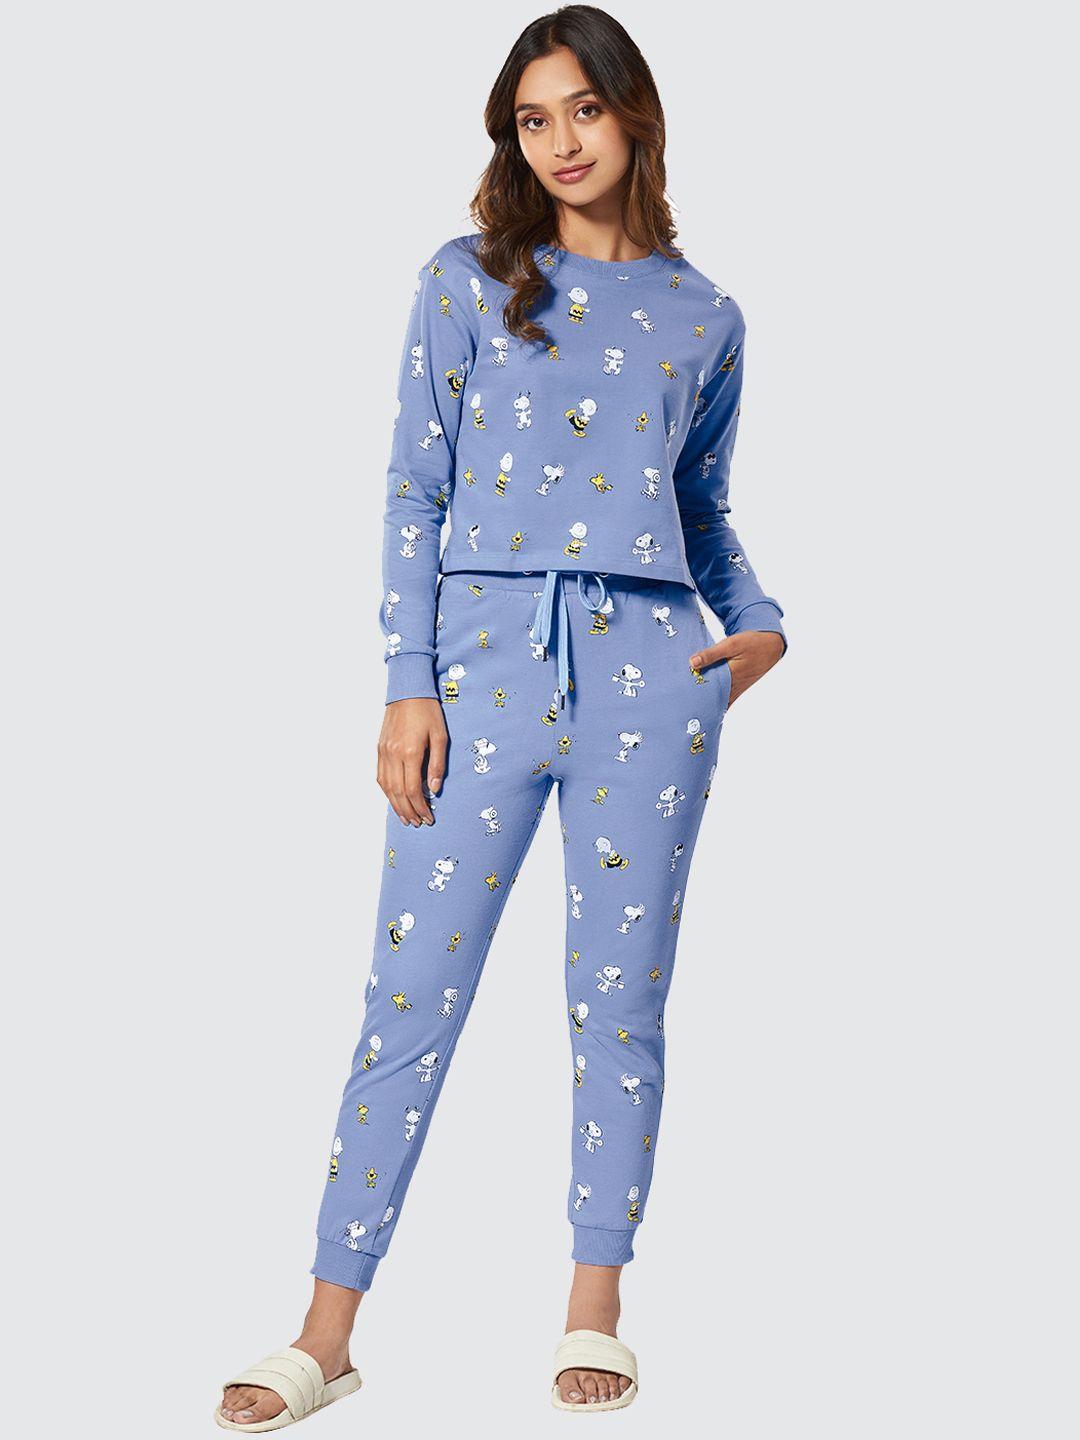 the souled store women blue peanut printed co-ords set